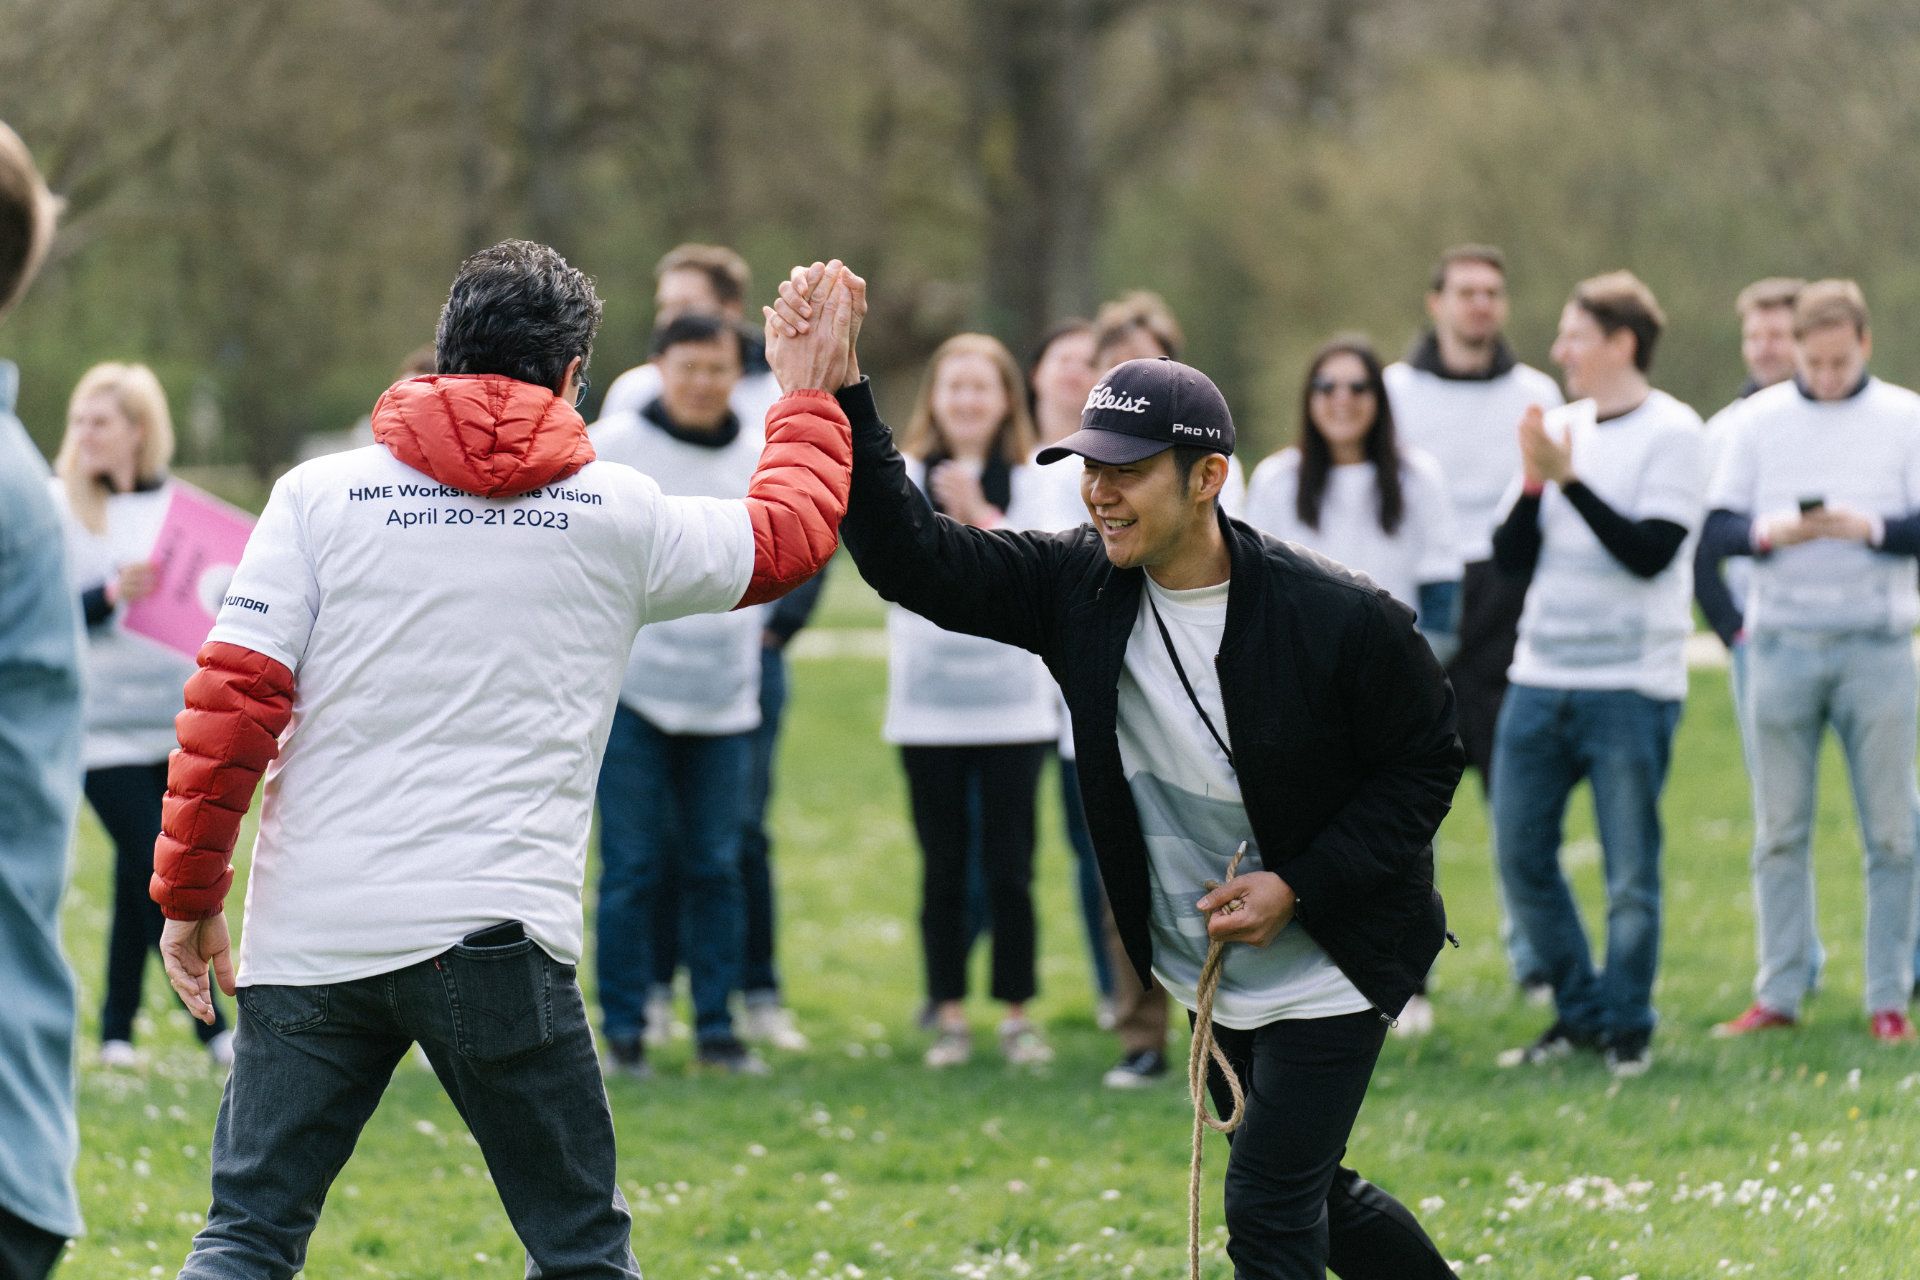 Two individuals exchanging a high-five in a park while surrounded by a group of onlookers wearing coordinated t-shirts, suggesting a team-building activity.